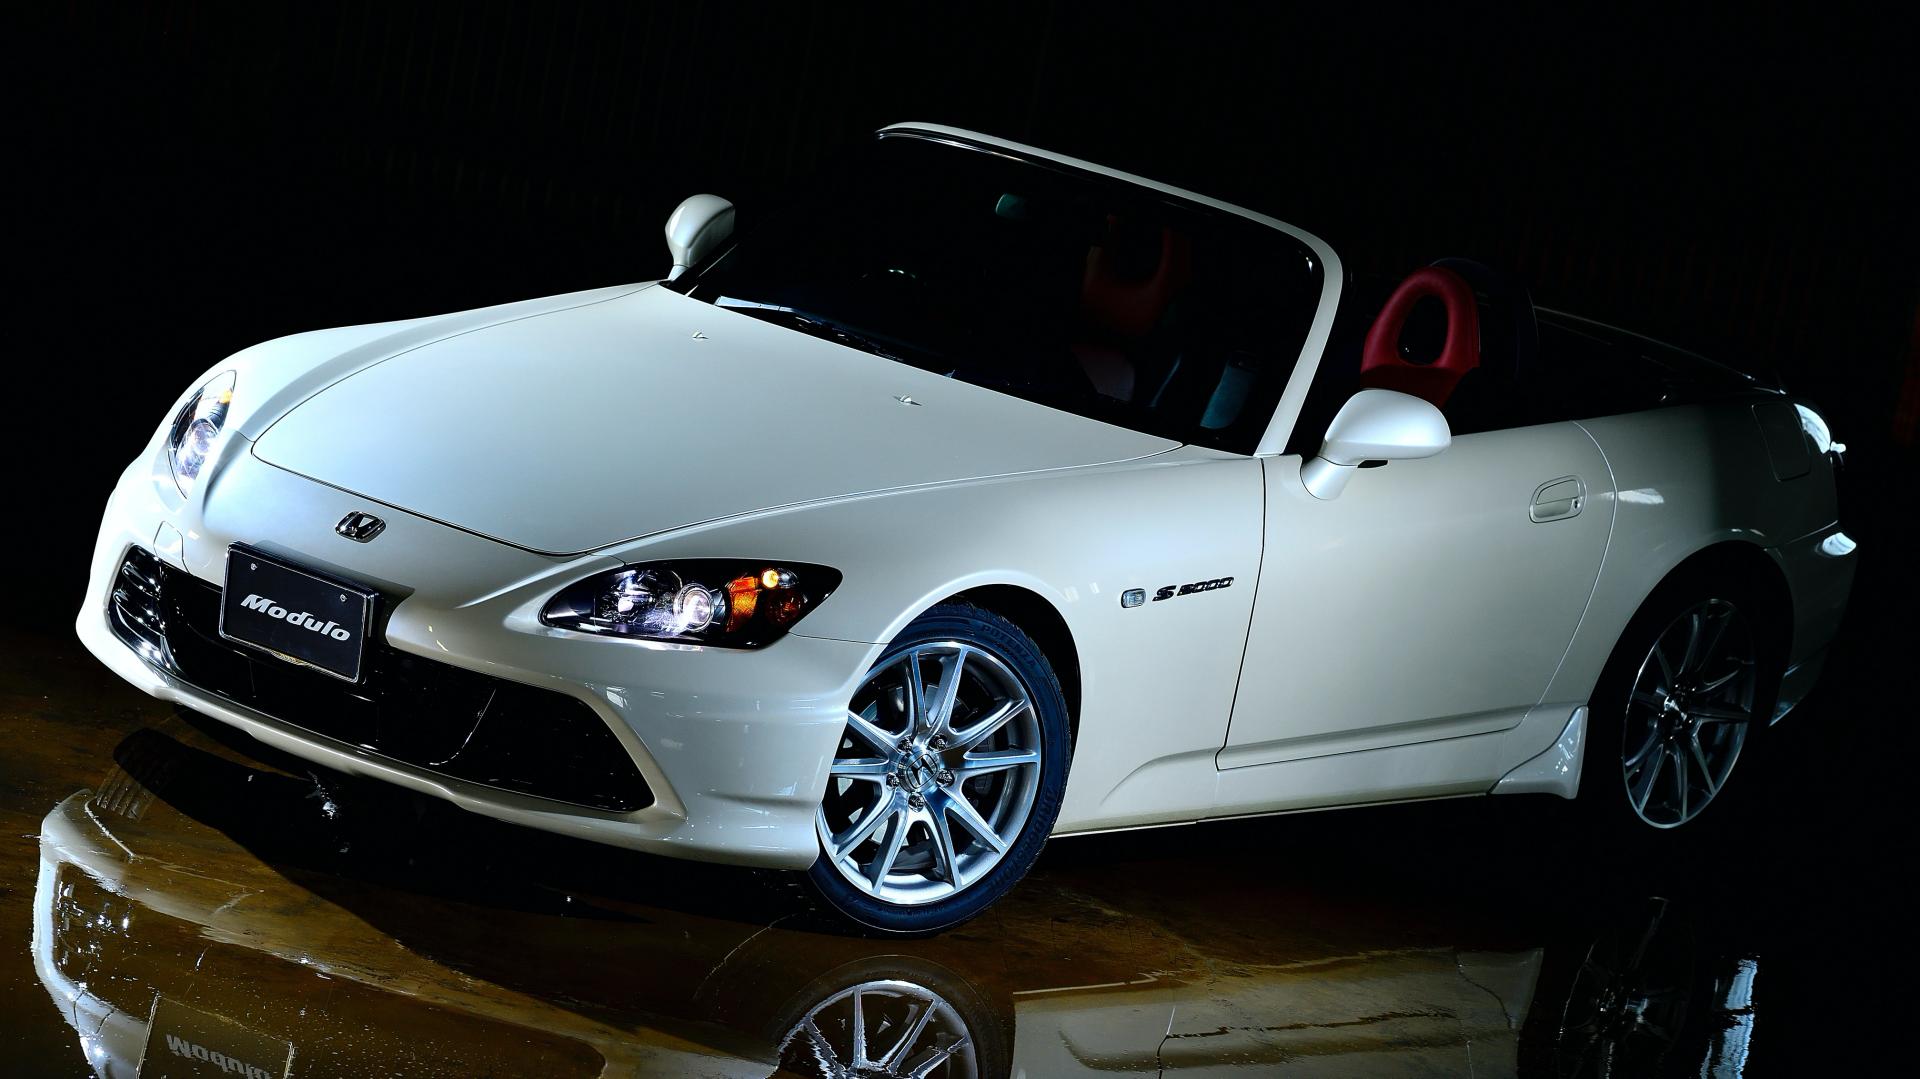 Vej Styring Frigøre Honda Wants To Freshen Up Your JDM S2000 Roadster With '20th Anniversary' Genuine  Accessories | Carscoops